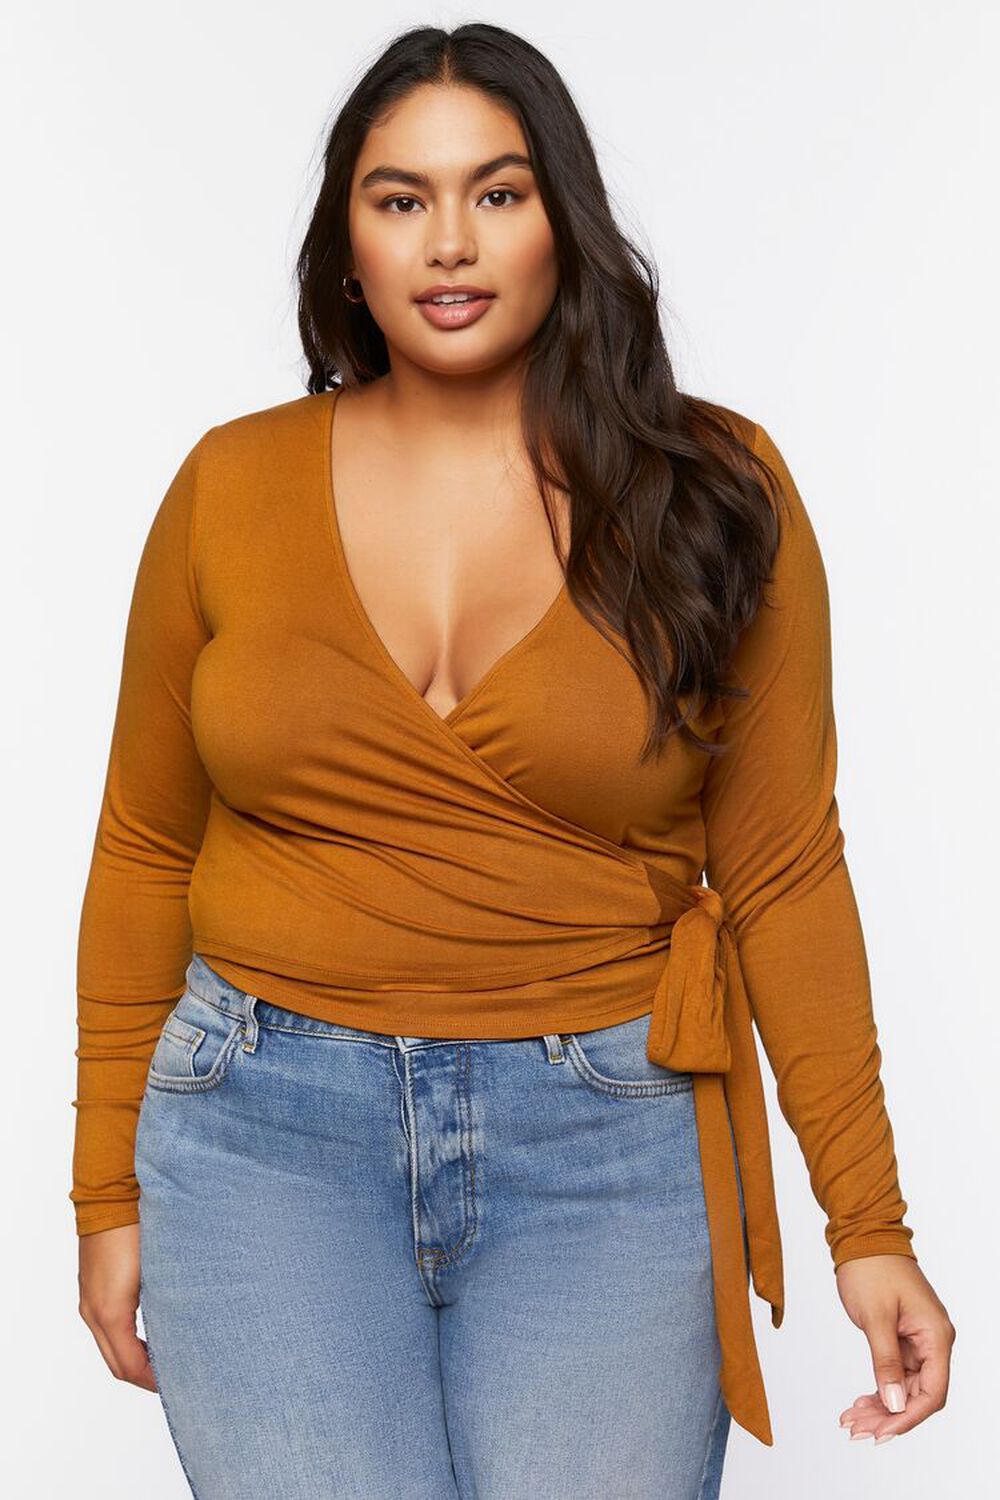 GINGER Plus Size Plunging Wrap Top, image 1